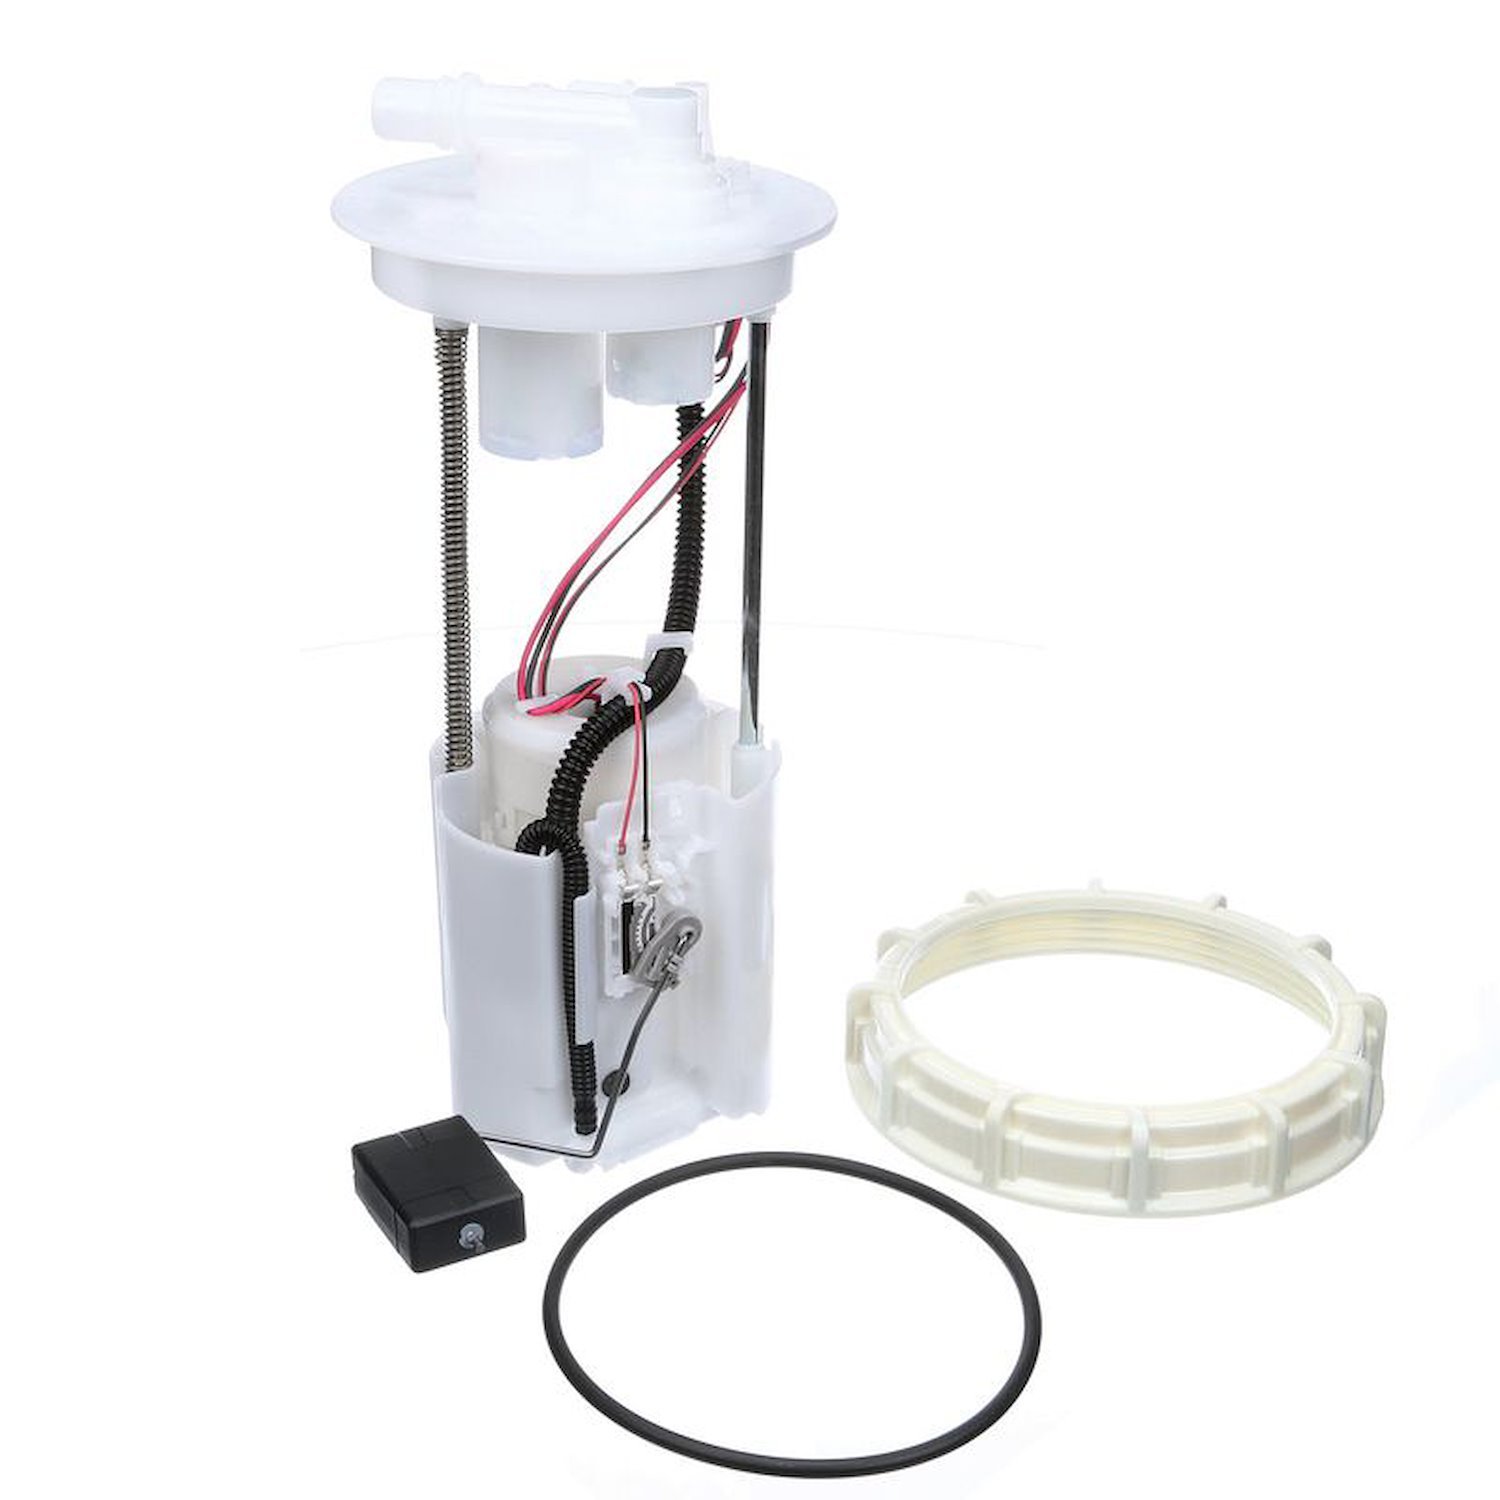 OE Replacement Fuel Pump Module Assembly for 2013-2015 Acura ILX/2012-2015 Honda Civic